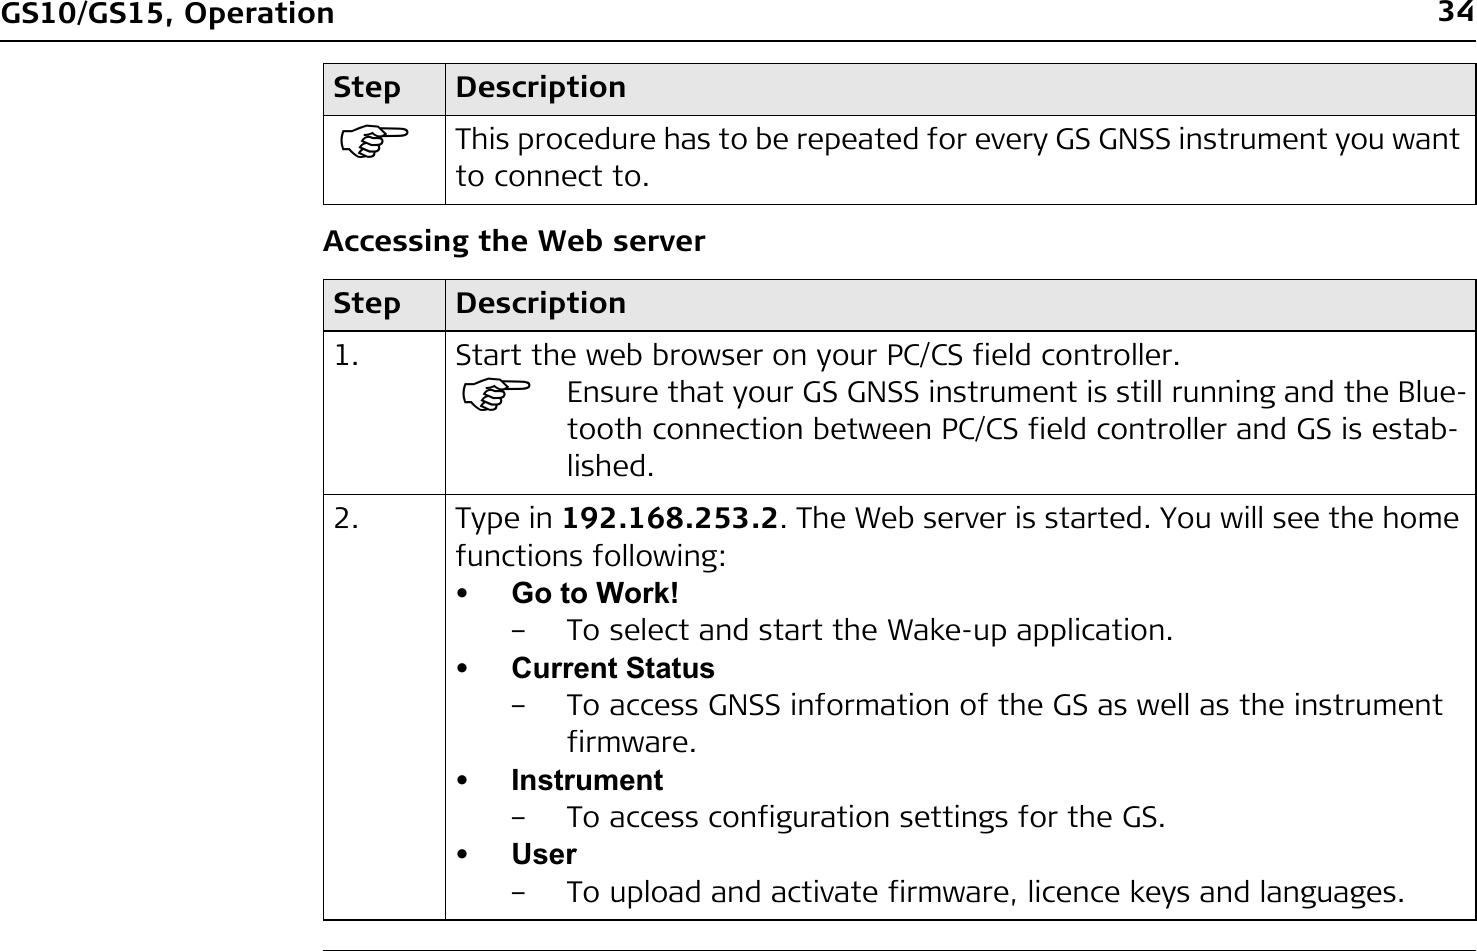 34GS10/GS15, OperationAccessing the Web server)This procedure has to be repeated for every GS GNSS instrument you want to connect to.Step Description1. Start the web browser on your PC/CS field controller.)Ensure that your GS GNSS instrument is still running and the Blue-tooth connection between PC/CS field controller and GS is estab-lished.2. Type in 192.168.253.2. The Web server is started. You will see the home functions following:•Go to Work!– To select and start the Wake-up application.•Current Status– To access GNSS information of the GS as well as the instrument firmware.•Instrument– To access configuration settings for the GS.•User– To upload and activate firmware, licence keys and languages.Step Description